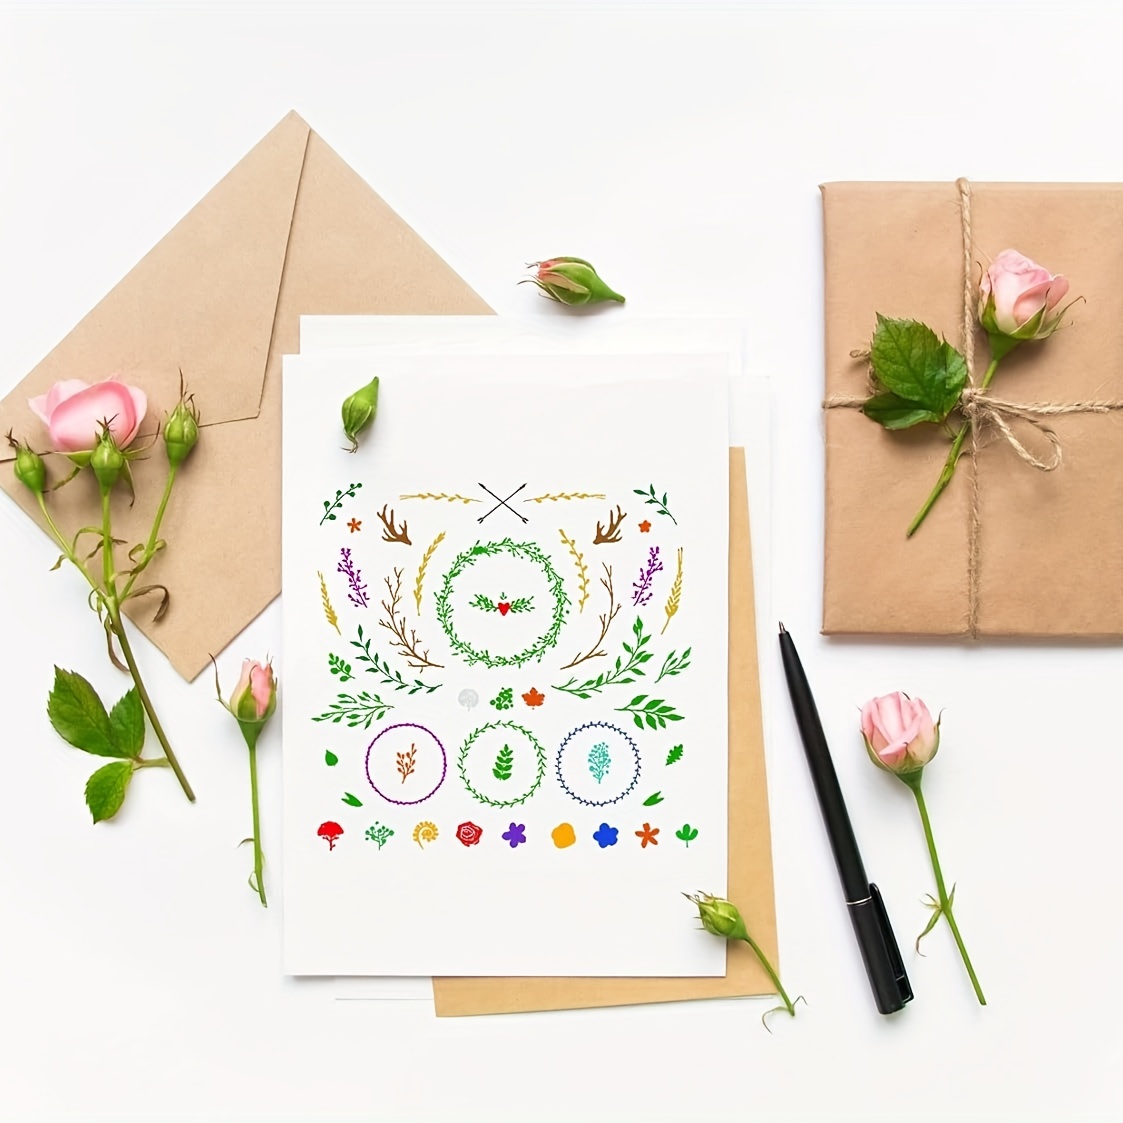 Flowers Leaves Clear Stamps for Card Making Decoration and DIY Scrapbooking